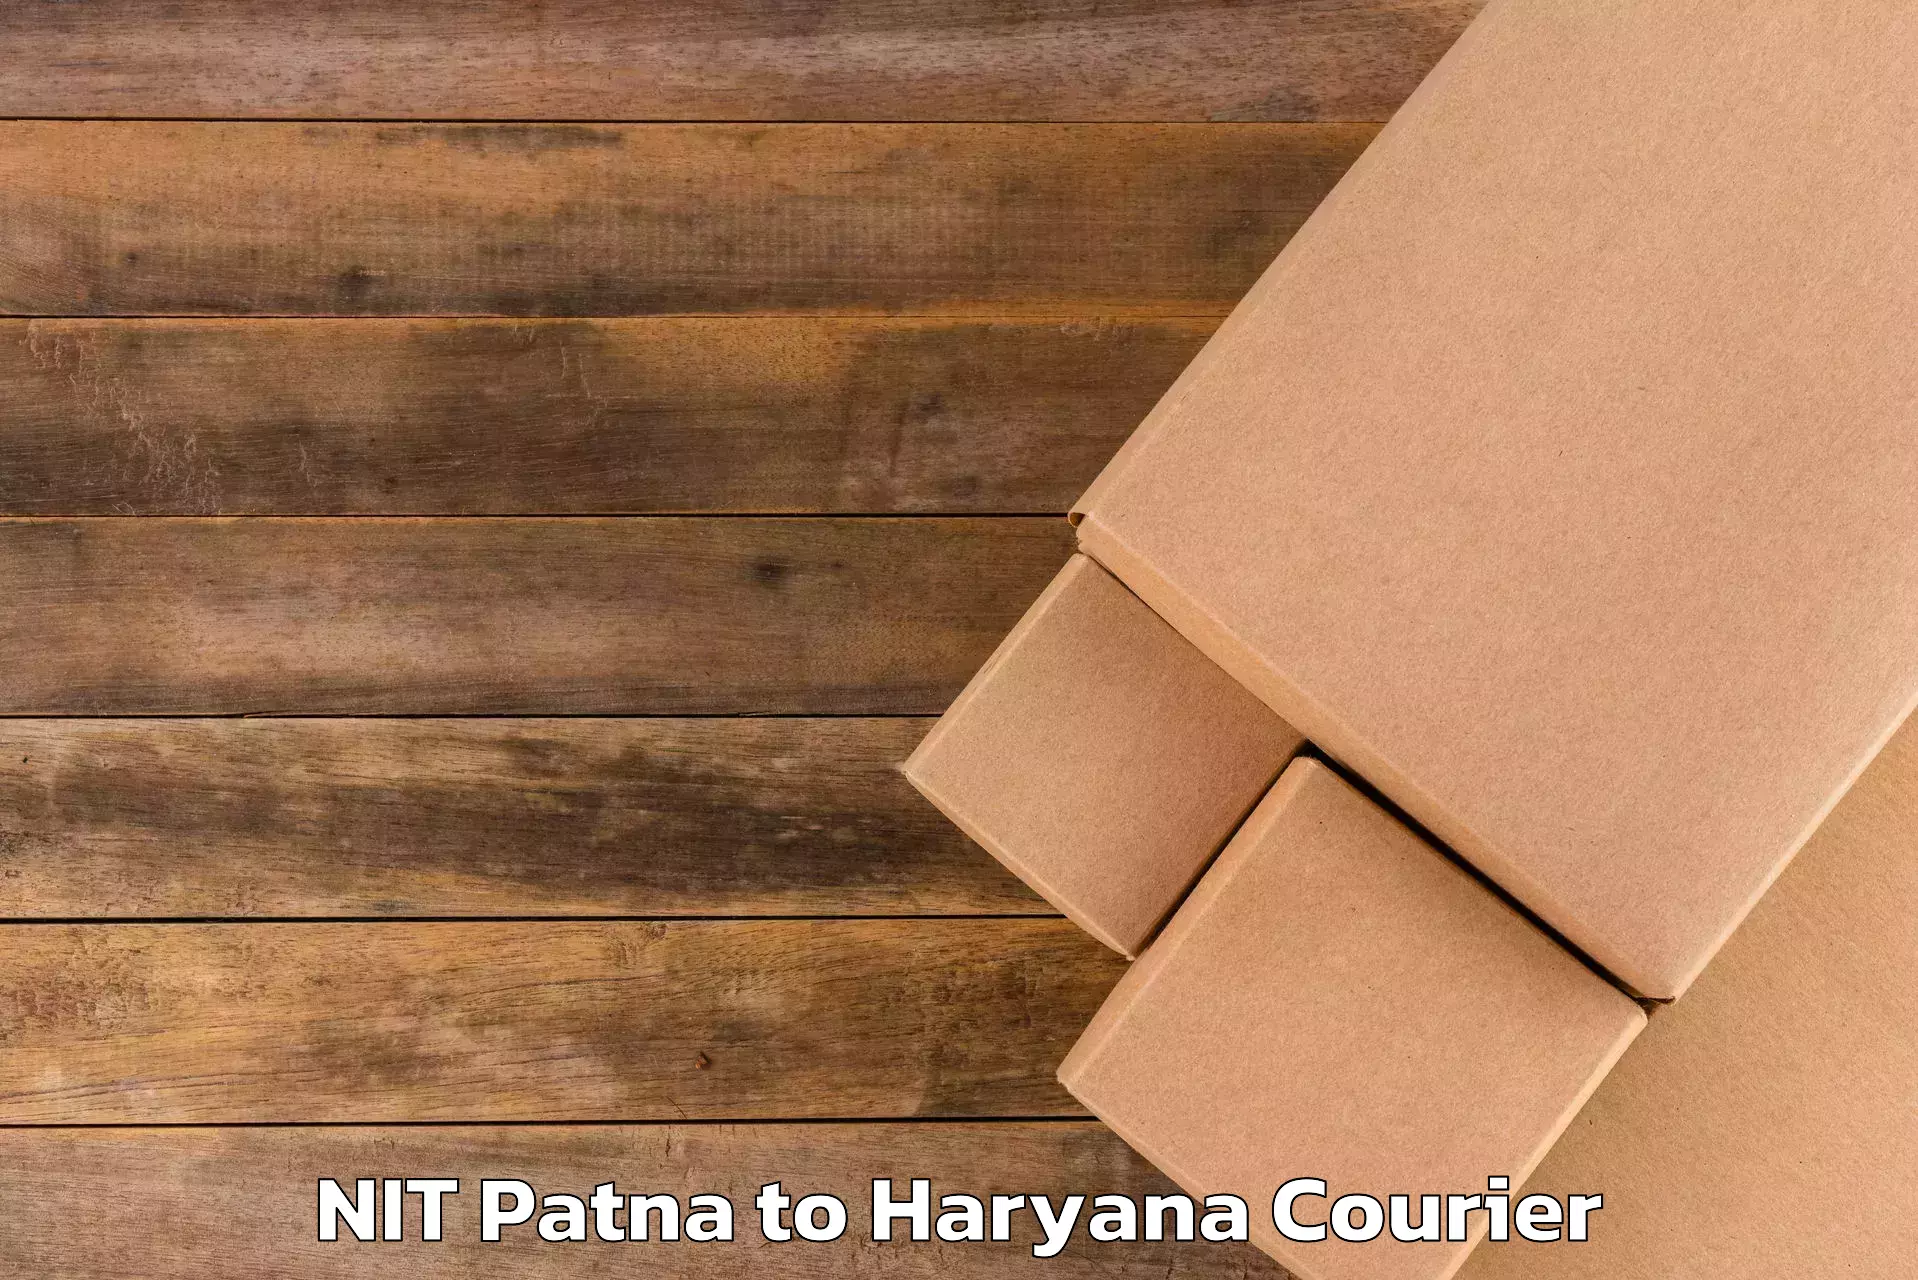 Luggage storage and delivery NIT Patna to Gurgaon